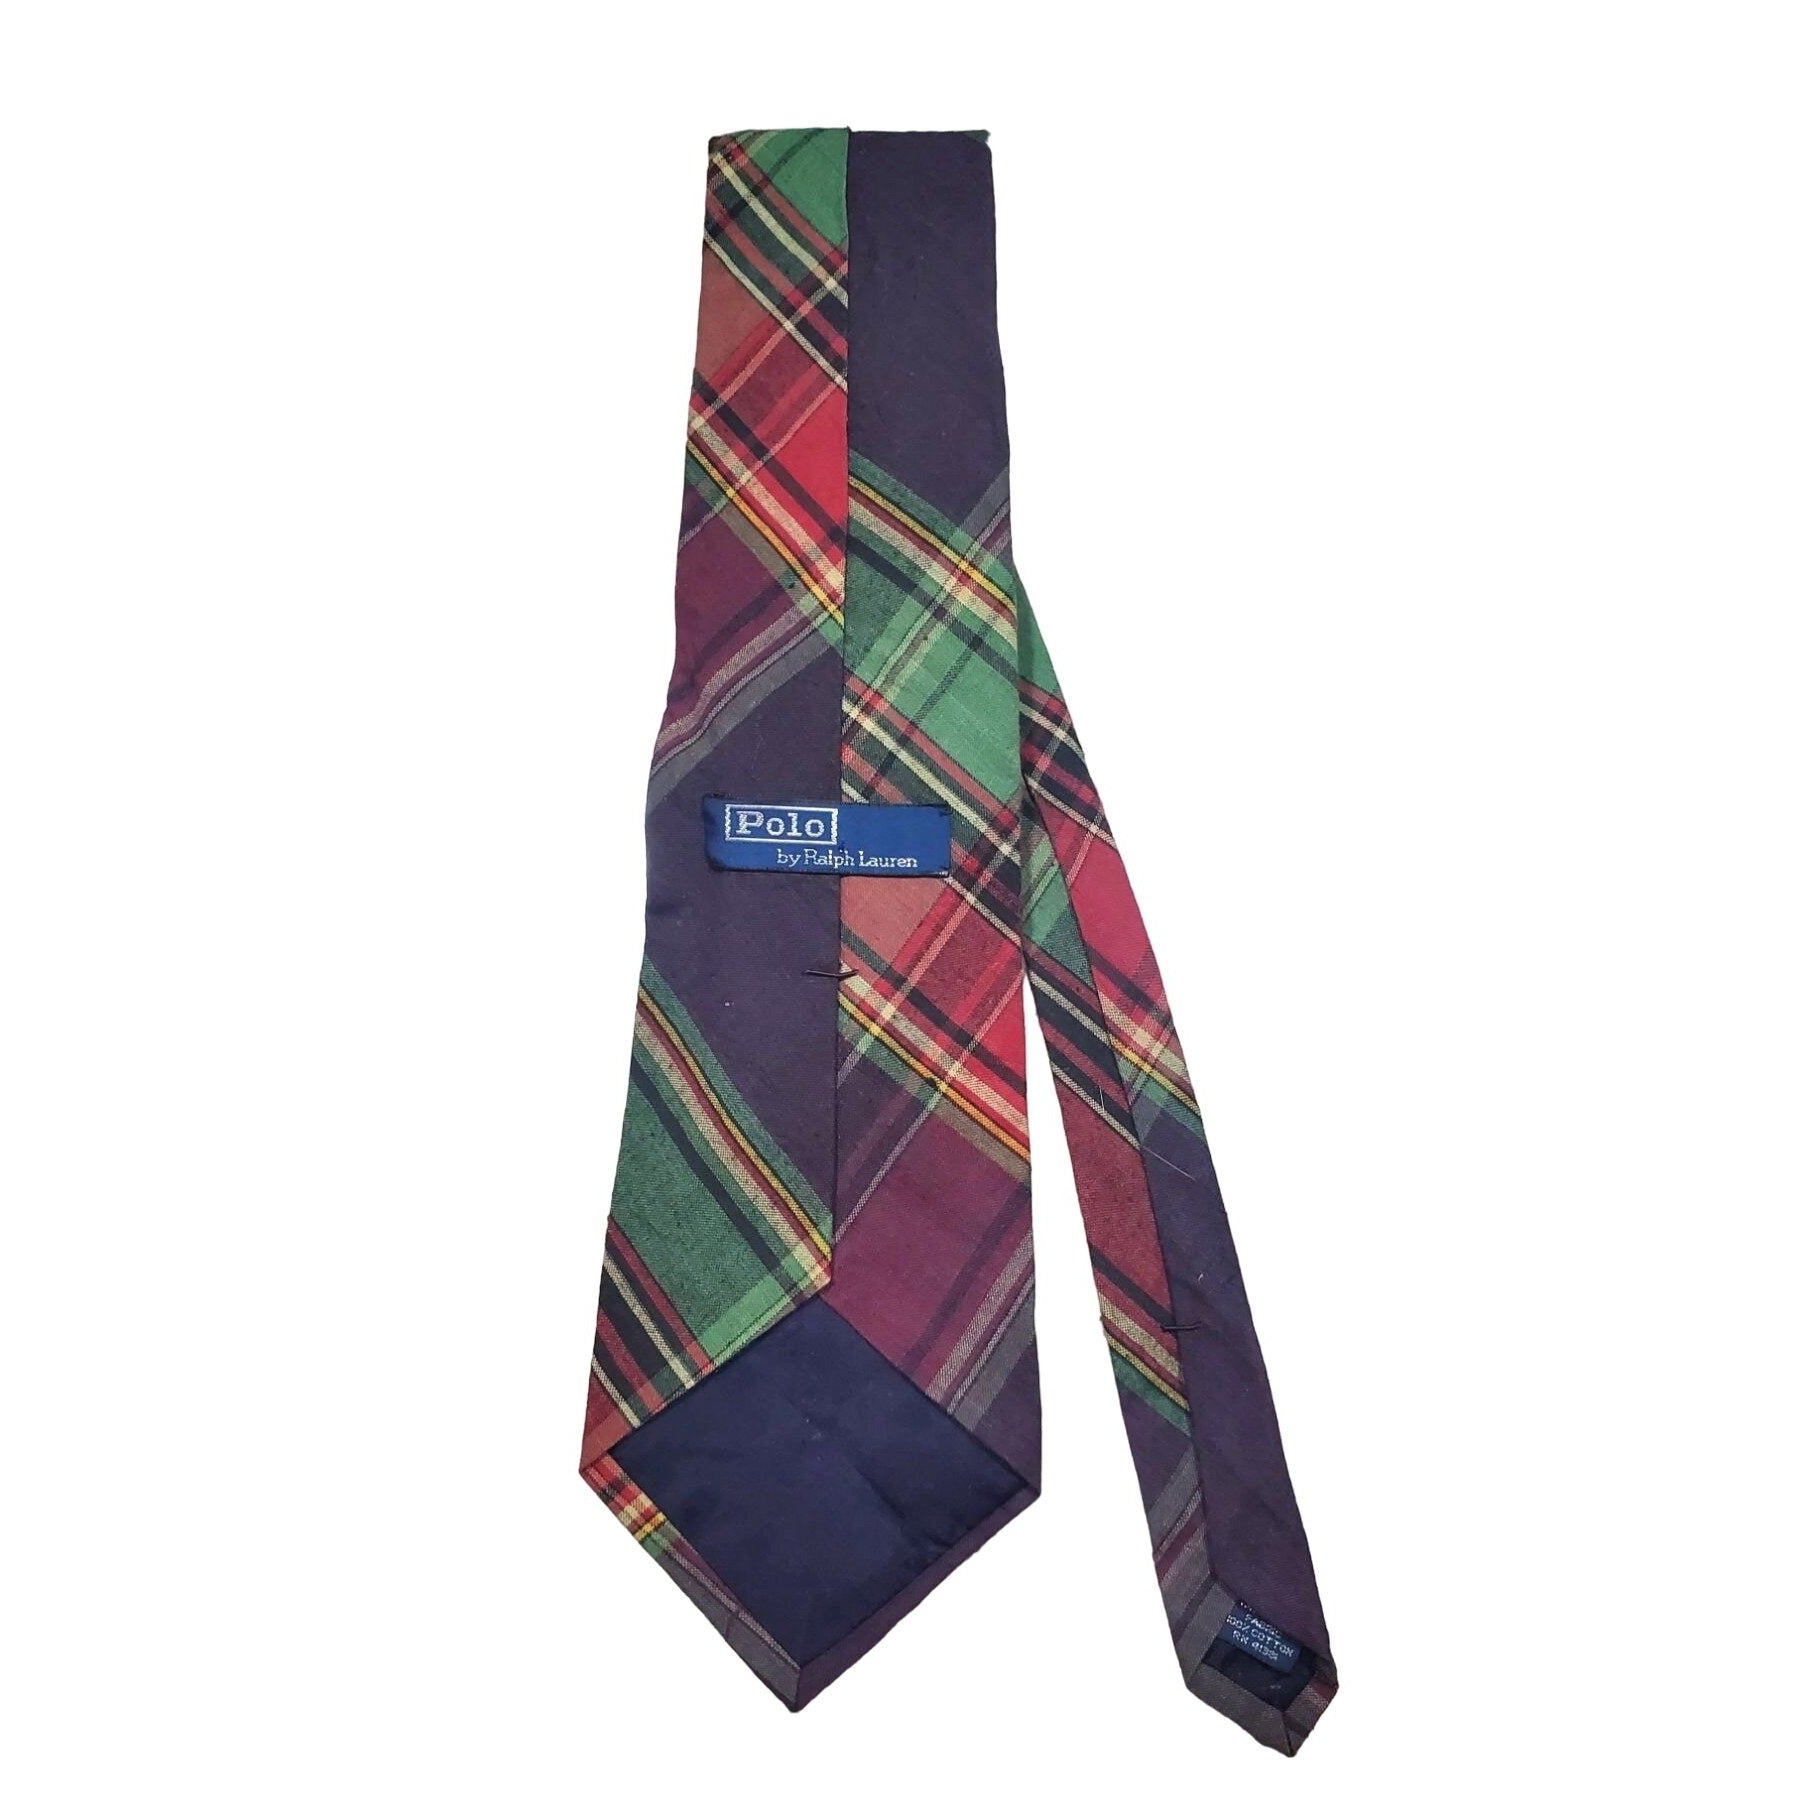 Polo by Ralph Lauren Maroon and Olive Men's Tie, 58 in. Long